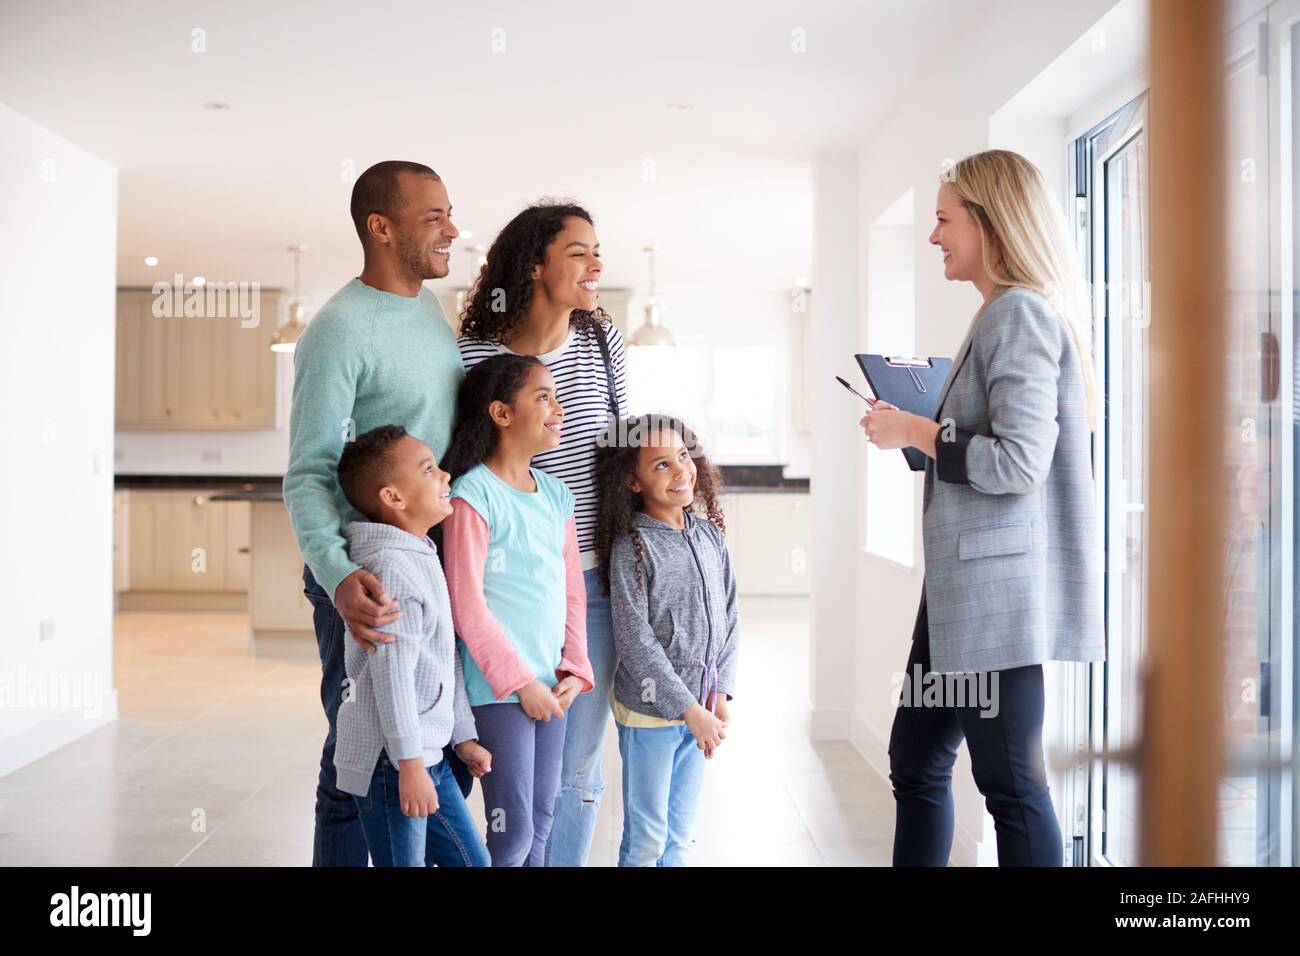 Female Realtor Showing Family Interested In Buying Around House Stock Photo